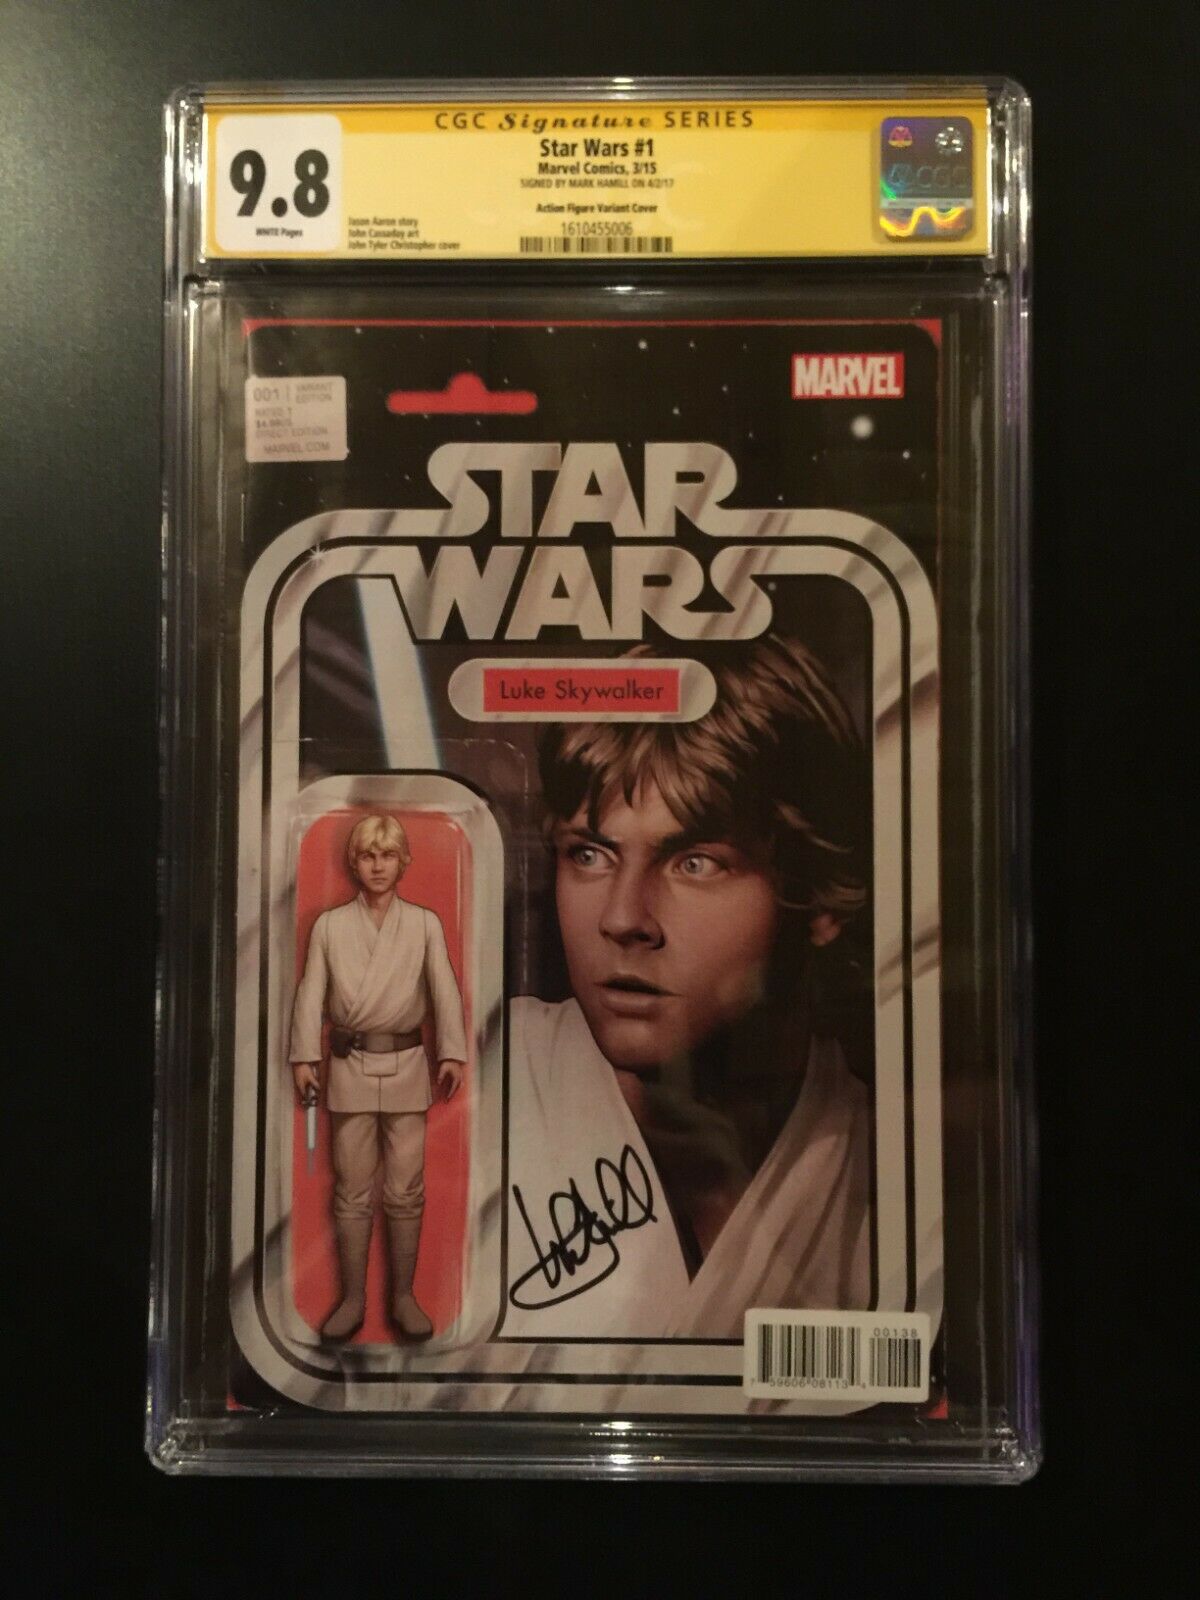 Marvel Star Wars Action Figure Variant Cover Comic Signed Mark Hamill CGC SS 98